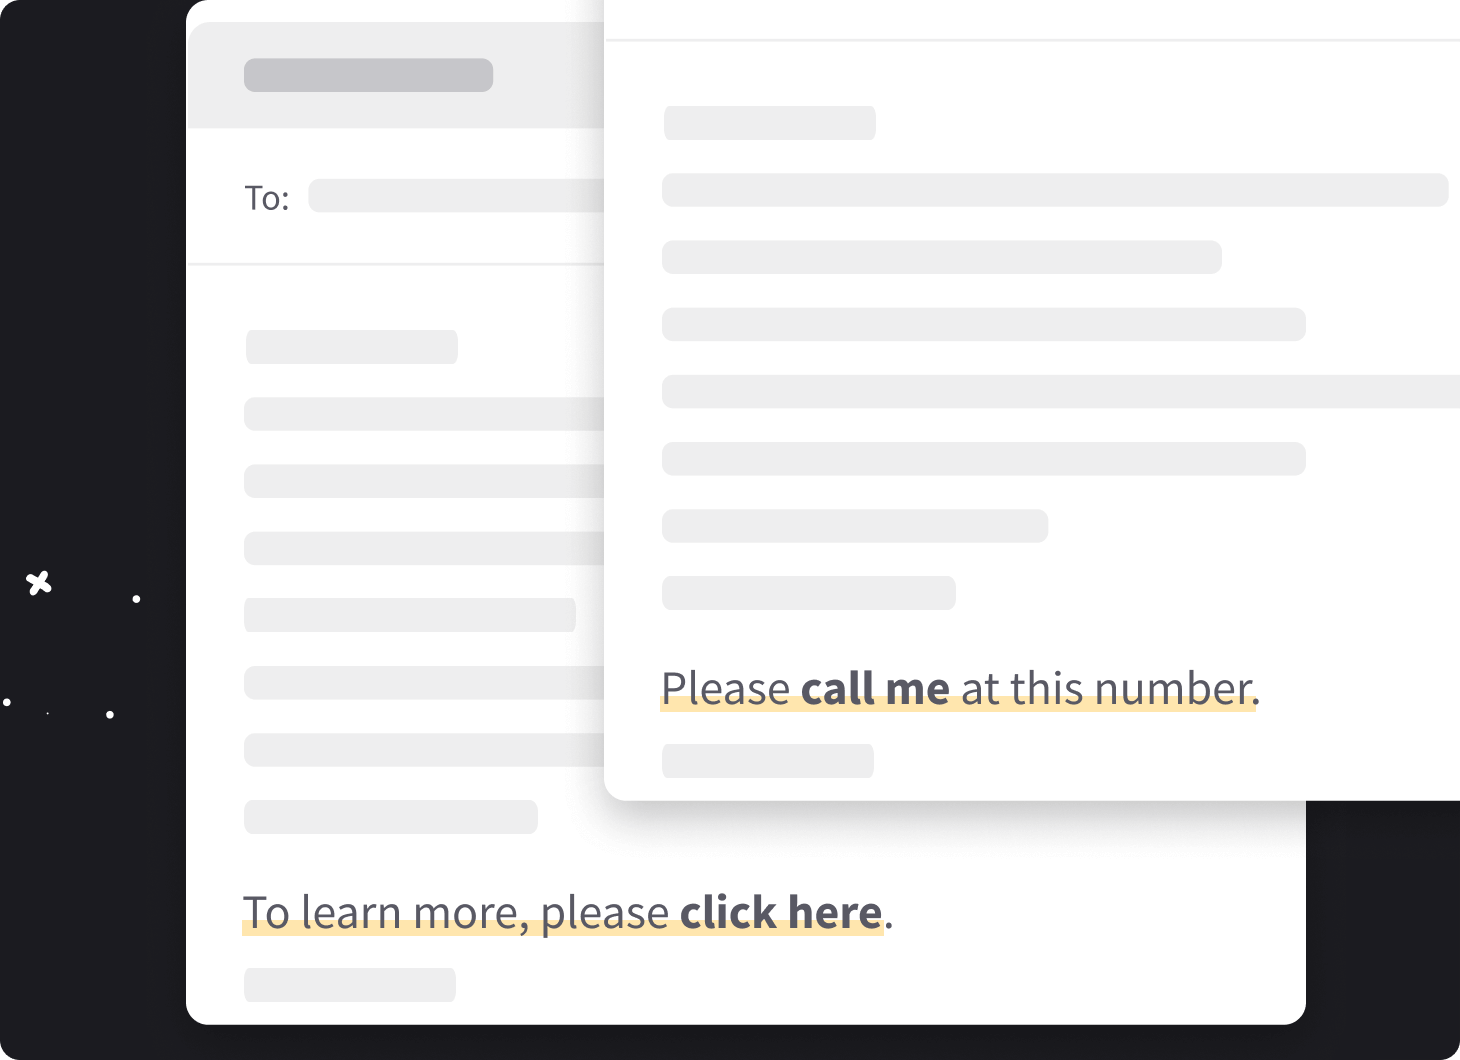 Call-to-action examples in emails.